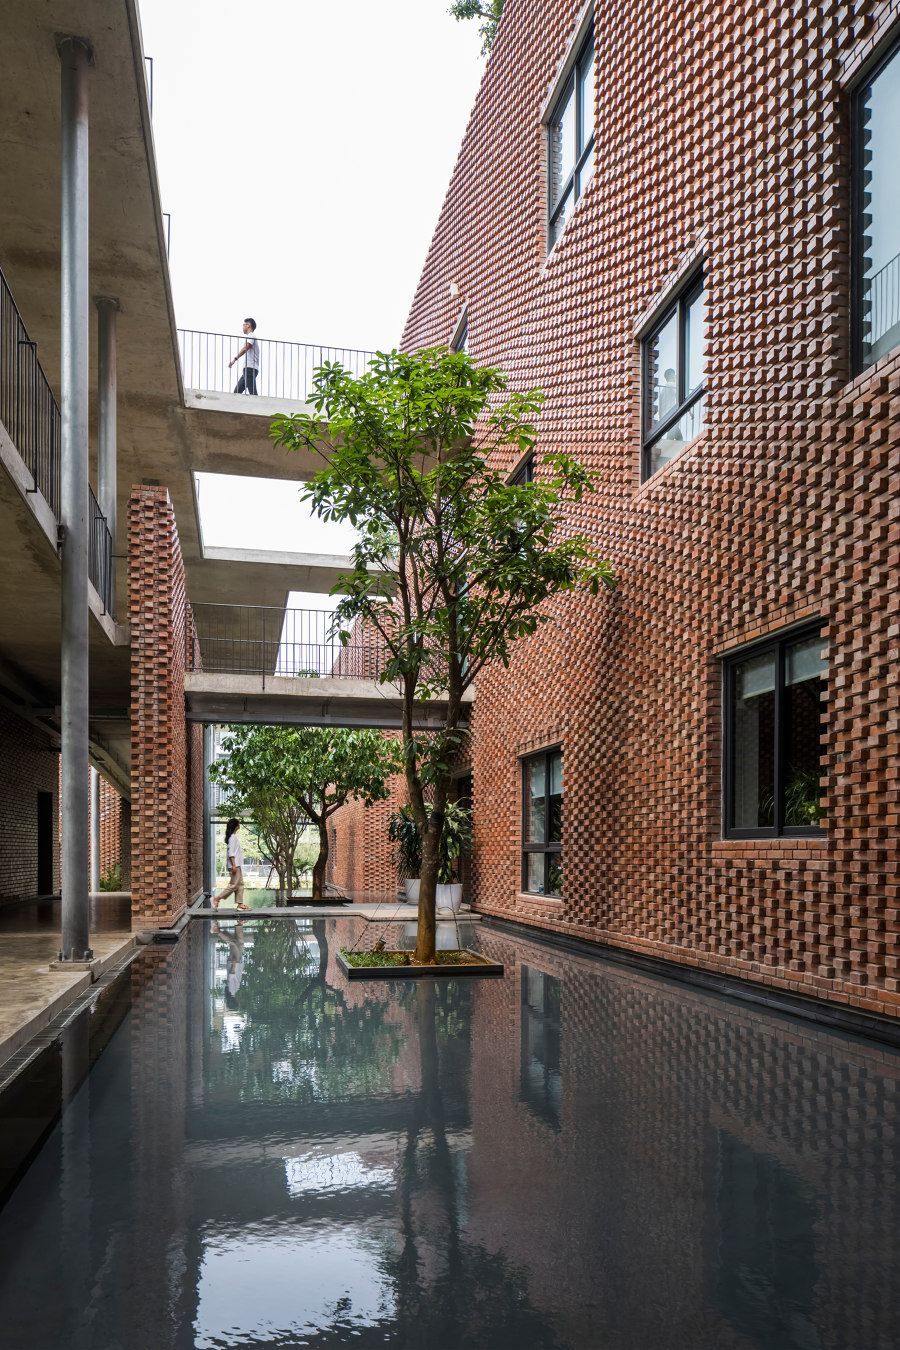 Viettel Academy Educational Centre by Vo Trong Nghia Architects | Universities